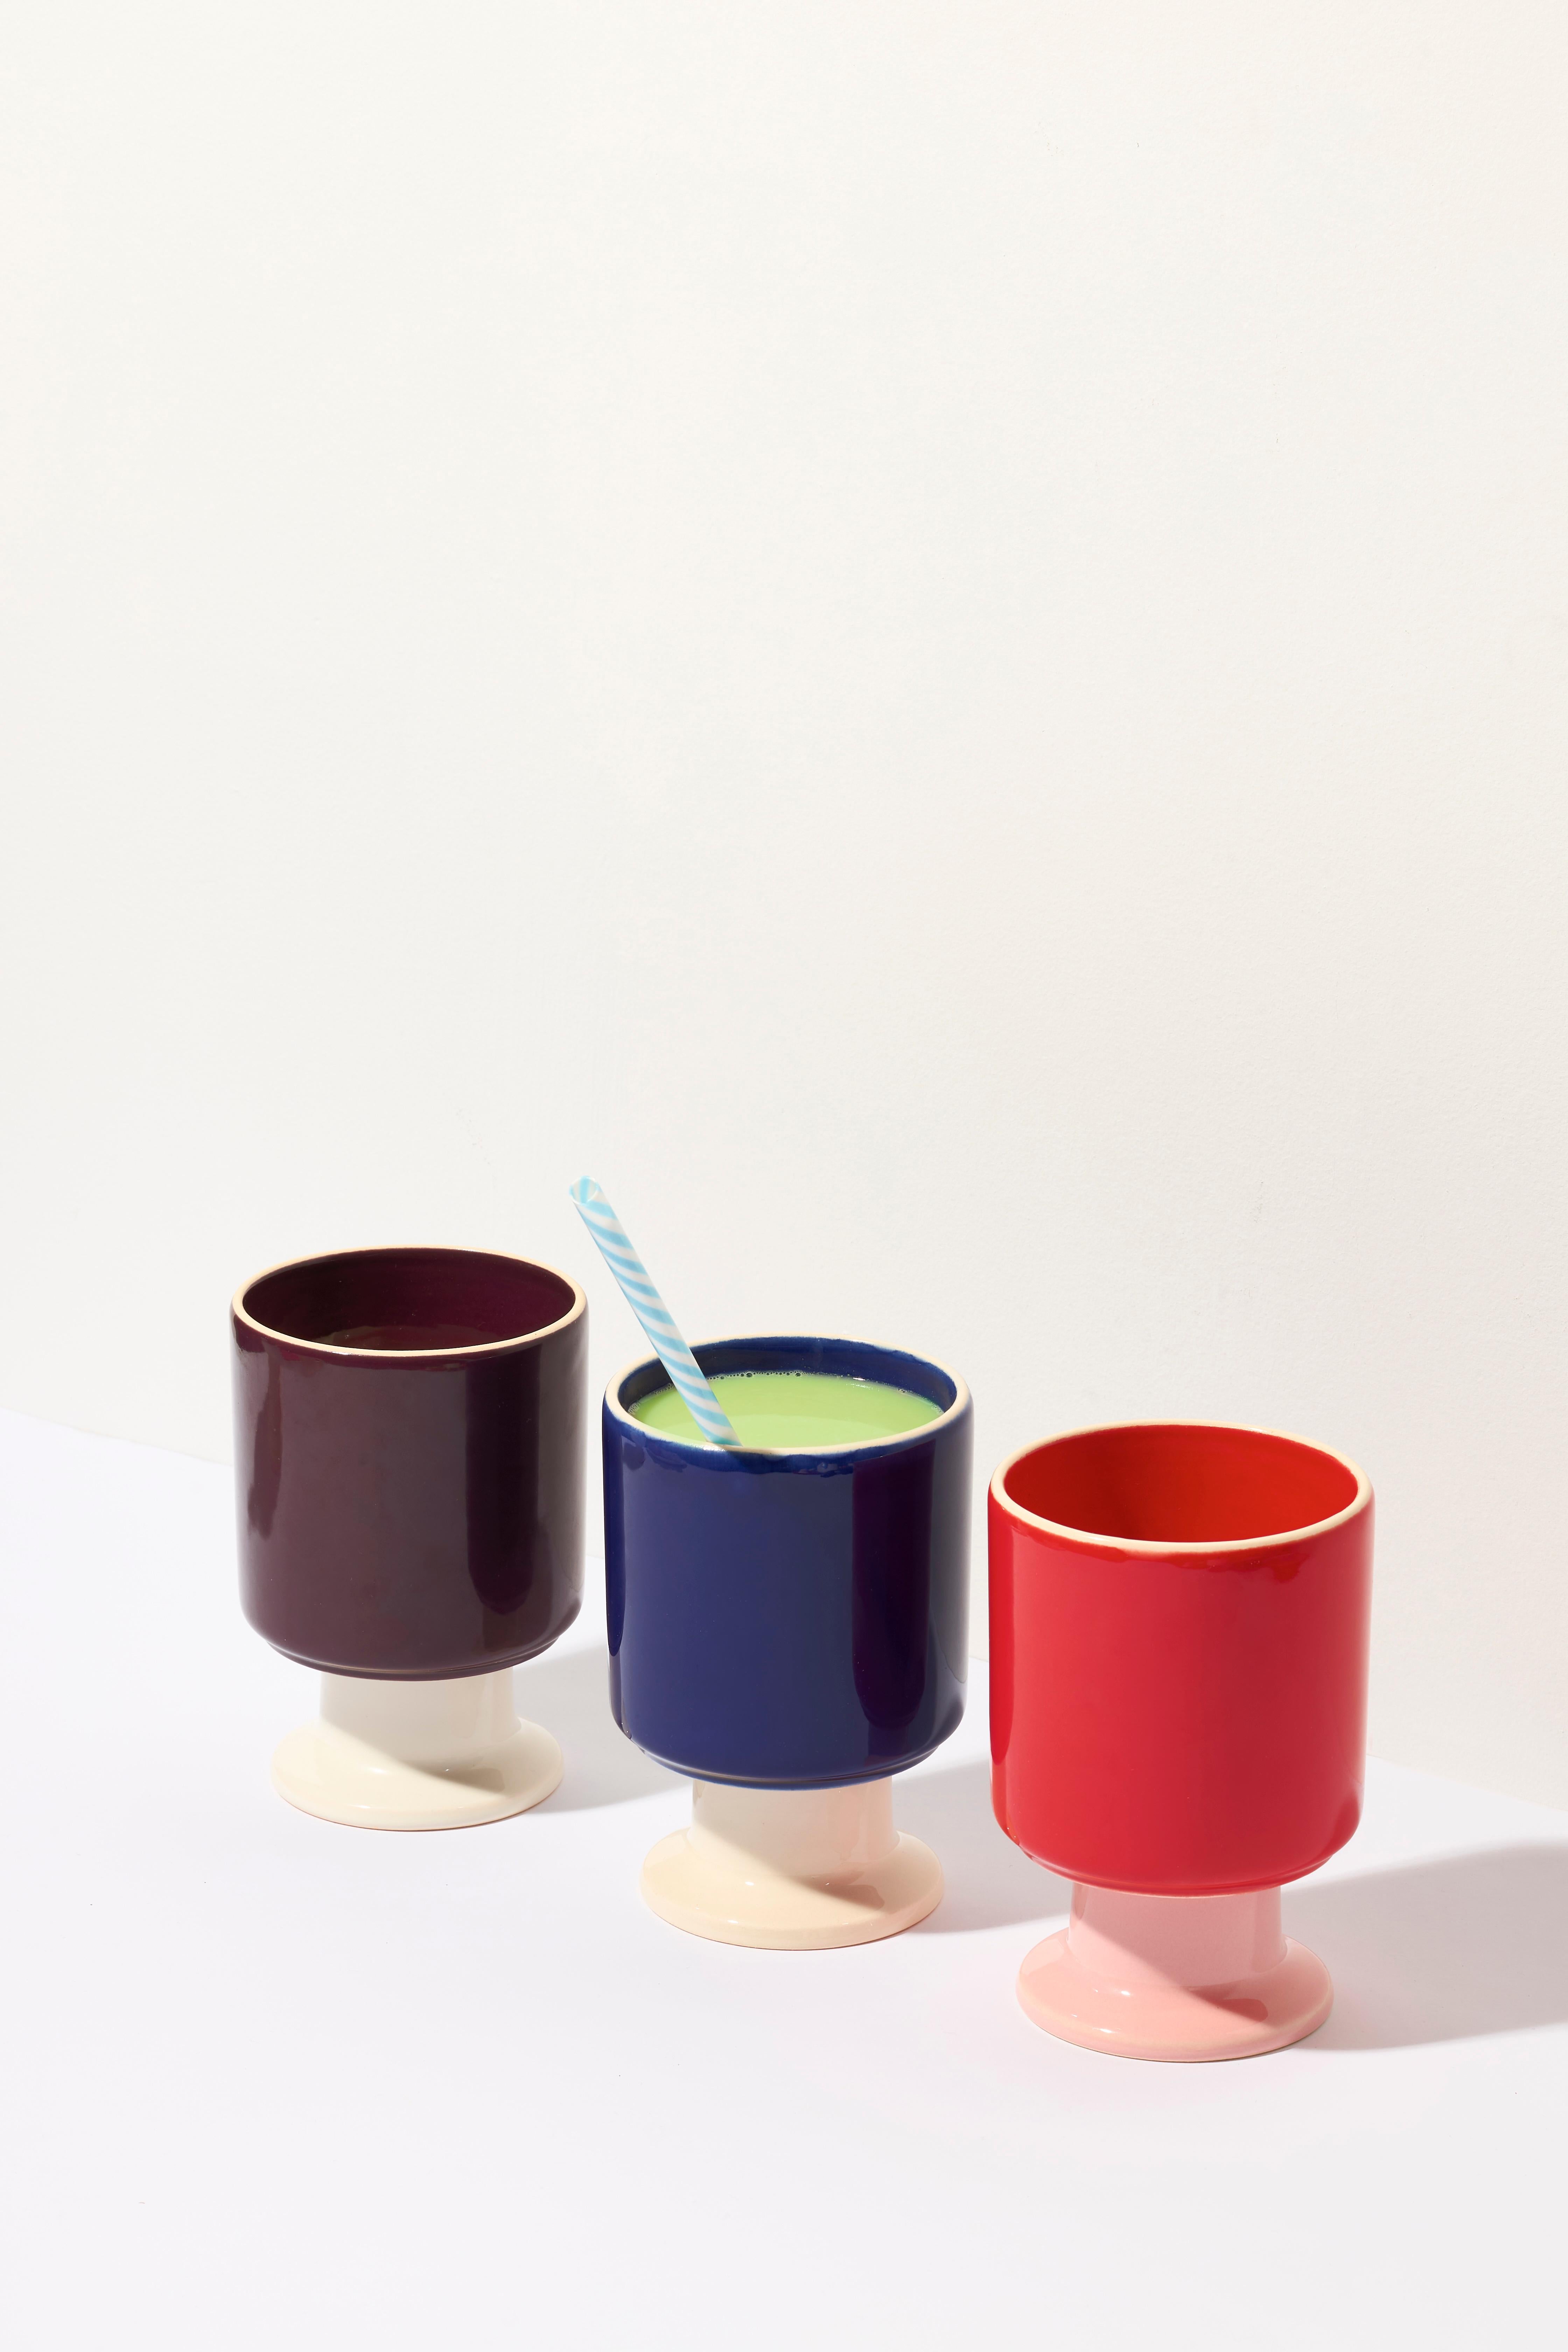 WIT mug / set of 3:
WIT / Kobalt
WIT / Red
WIT / Plum

The WIT cup is a multifunctional vessel with a playful stem. It can become your favorite coffee cup, a dessert bowl, a container for pens, or other favorite accessories. WIT chalices can be